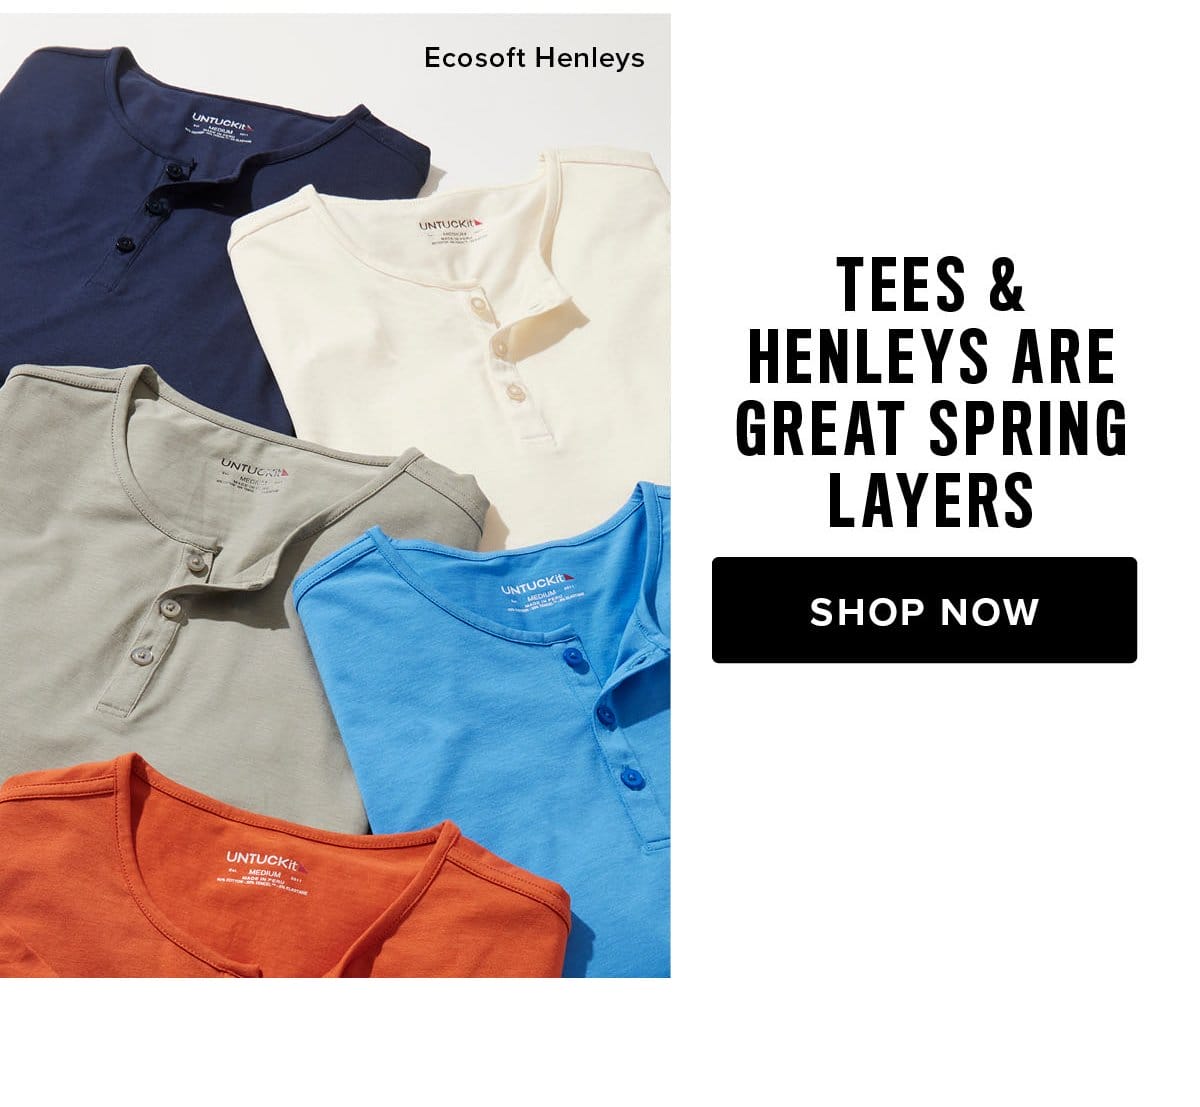 Tees & Henleys Are Great Spring Layers